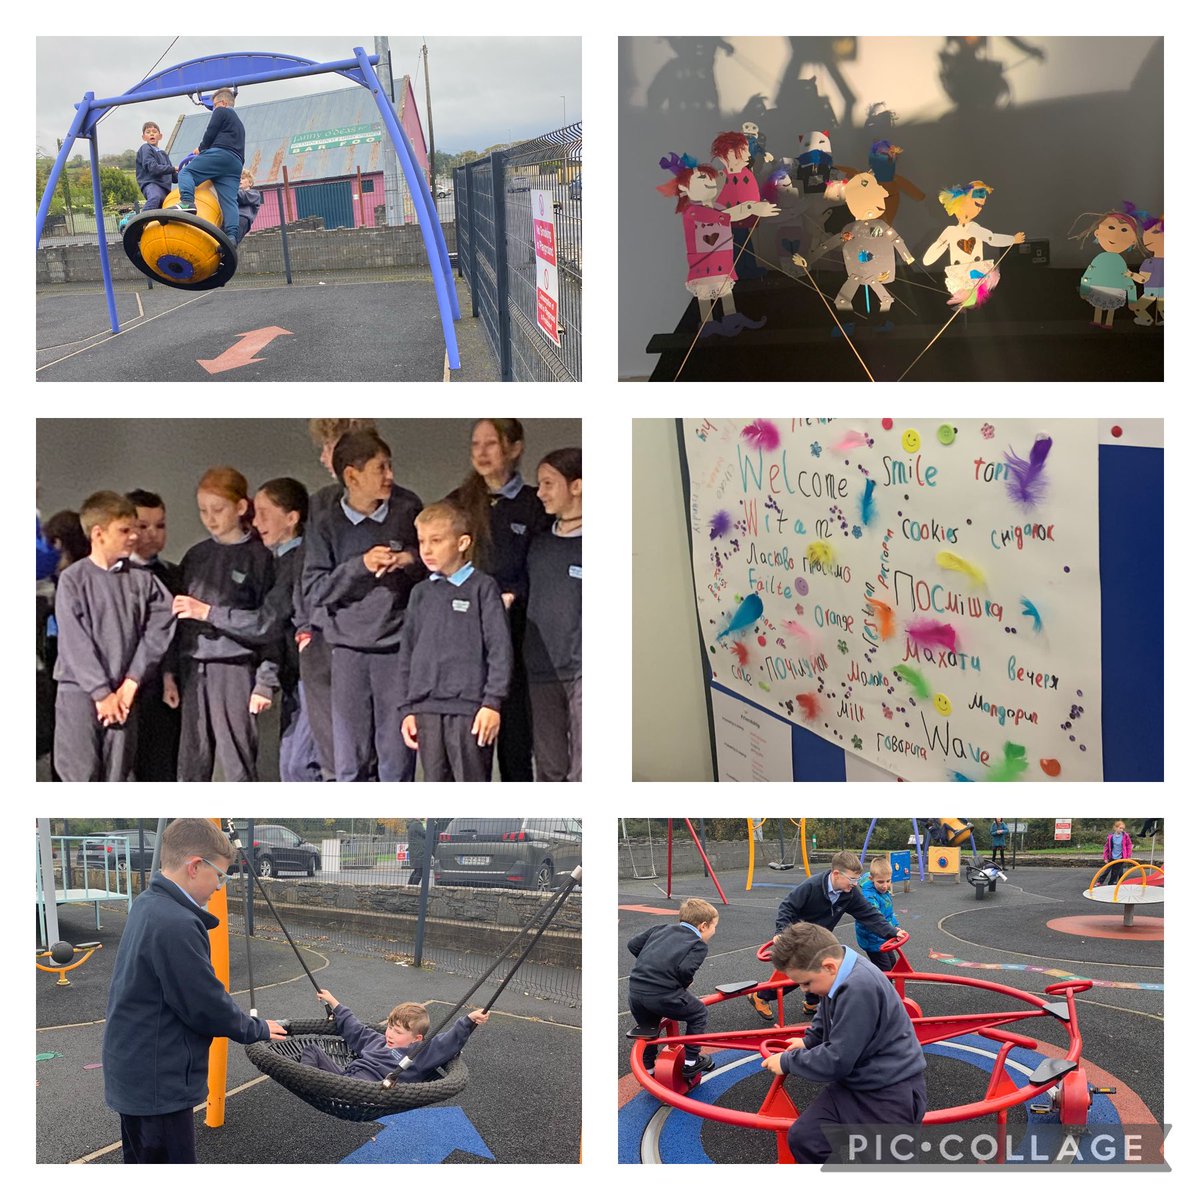 Fabulous day today in Glór for the last day of our ‘world of welcome’. Thanks to ⁦@clarelibrary⁩ and Kilkee library for a fabulous 6 weeks. We performed our song and dance, viewed our puppet display and listened to our podcasts. Lovely to see all our work coming together.